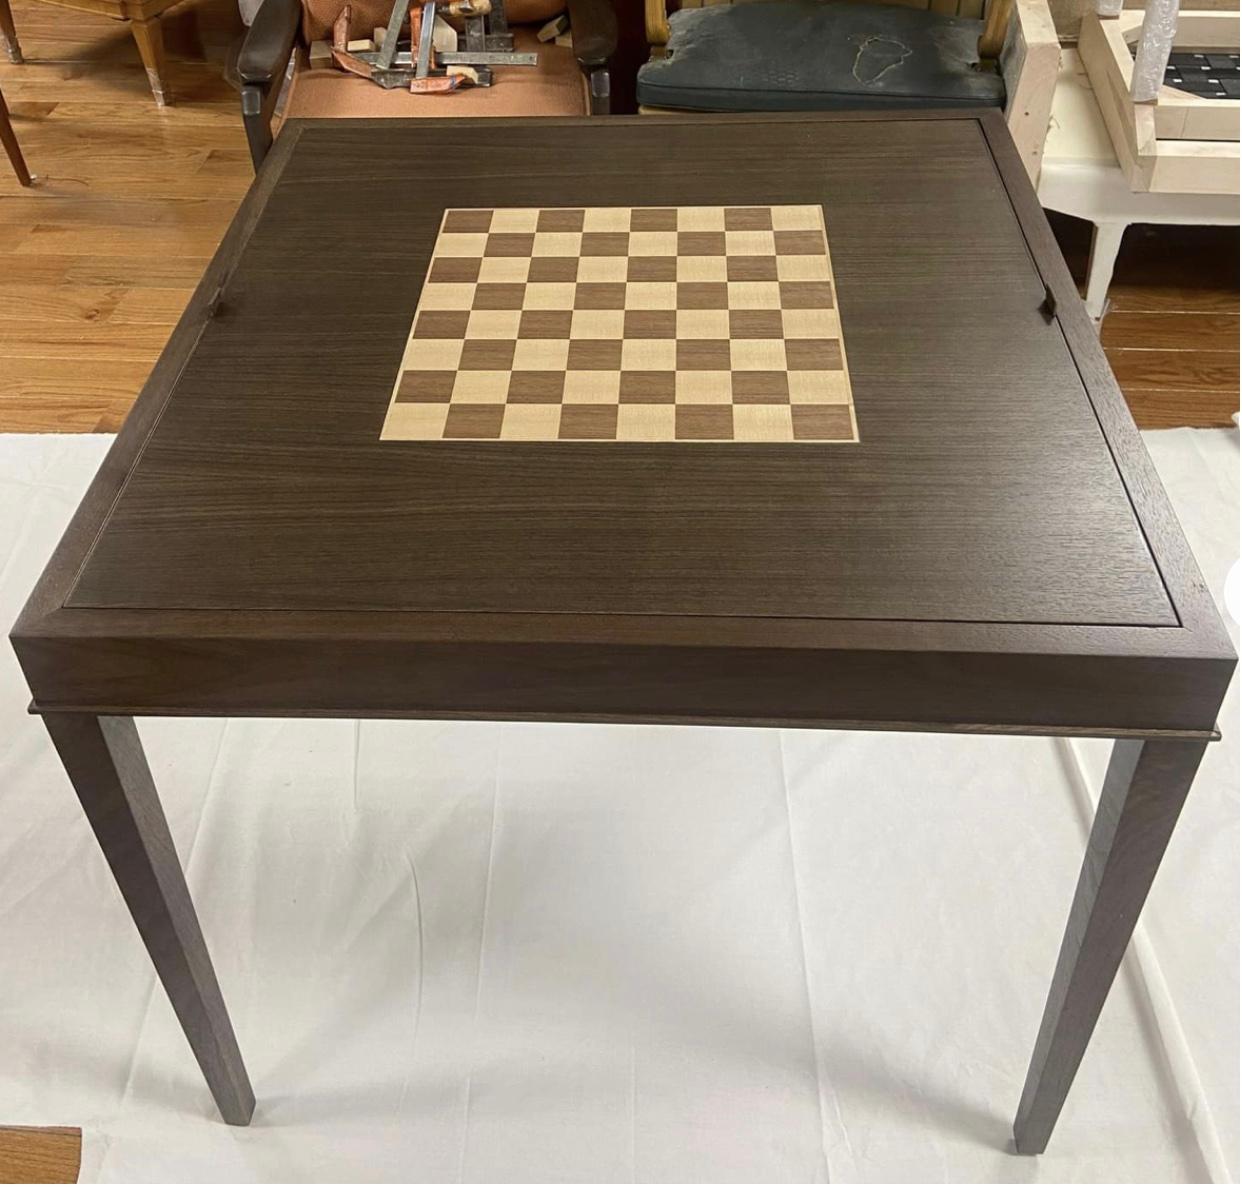 board game table with removable topper